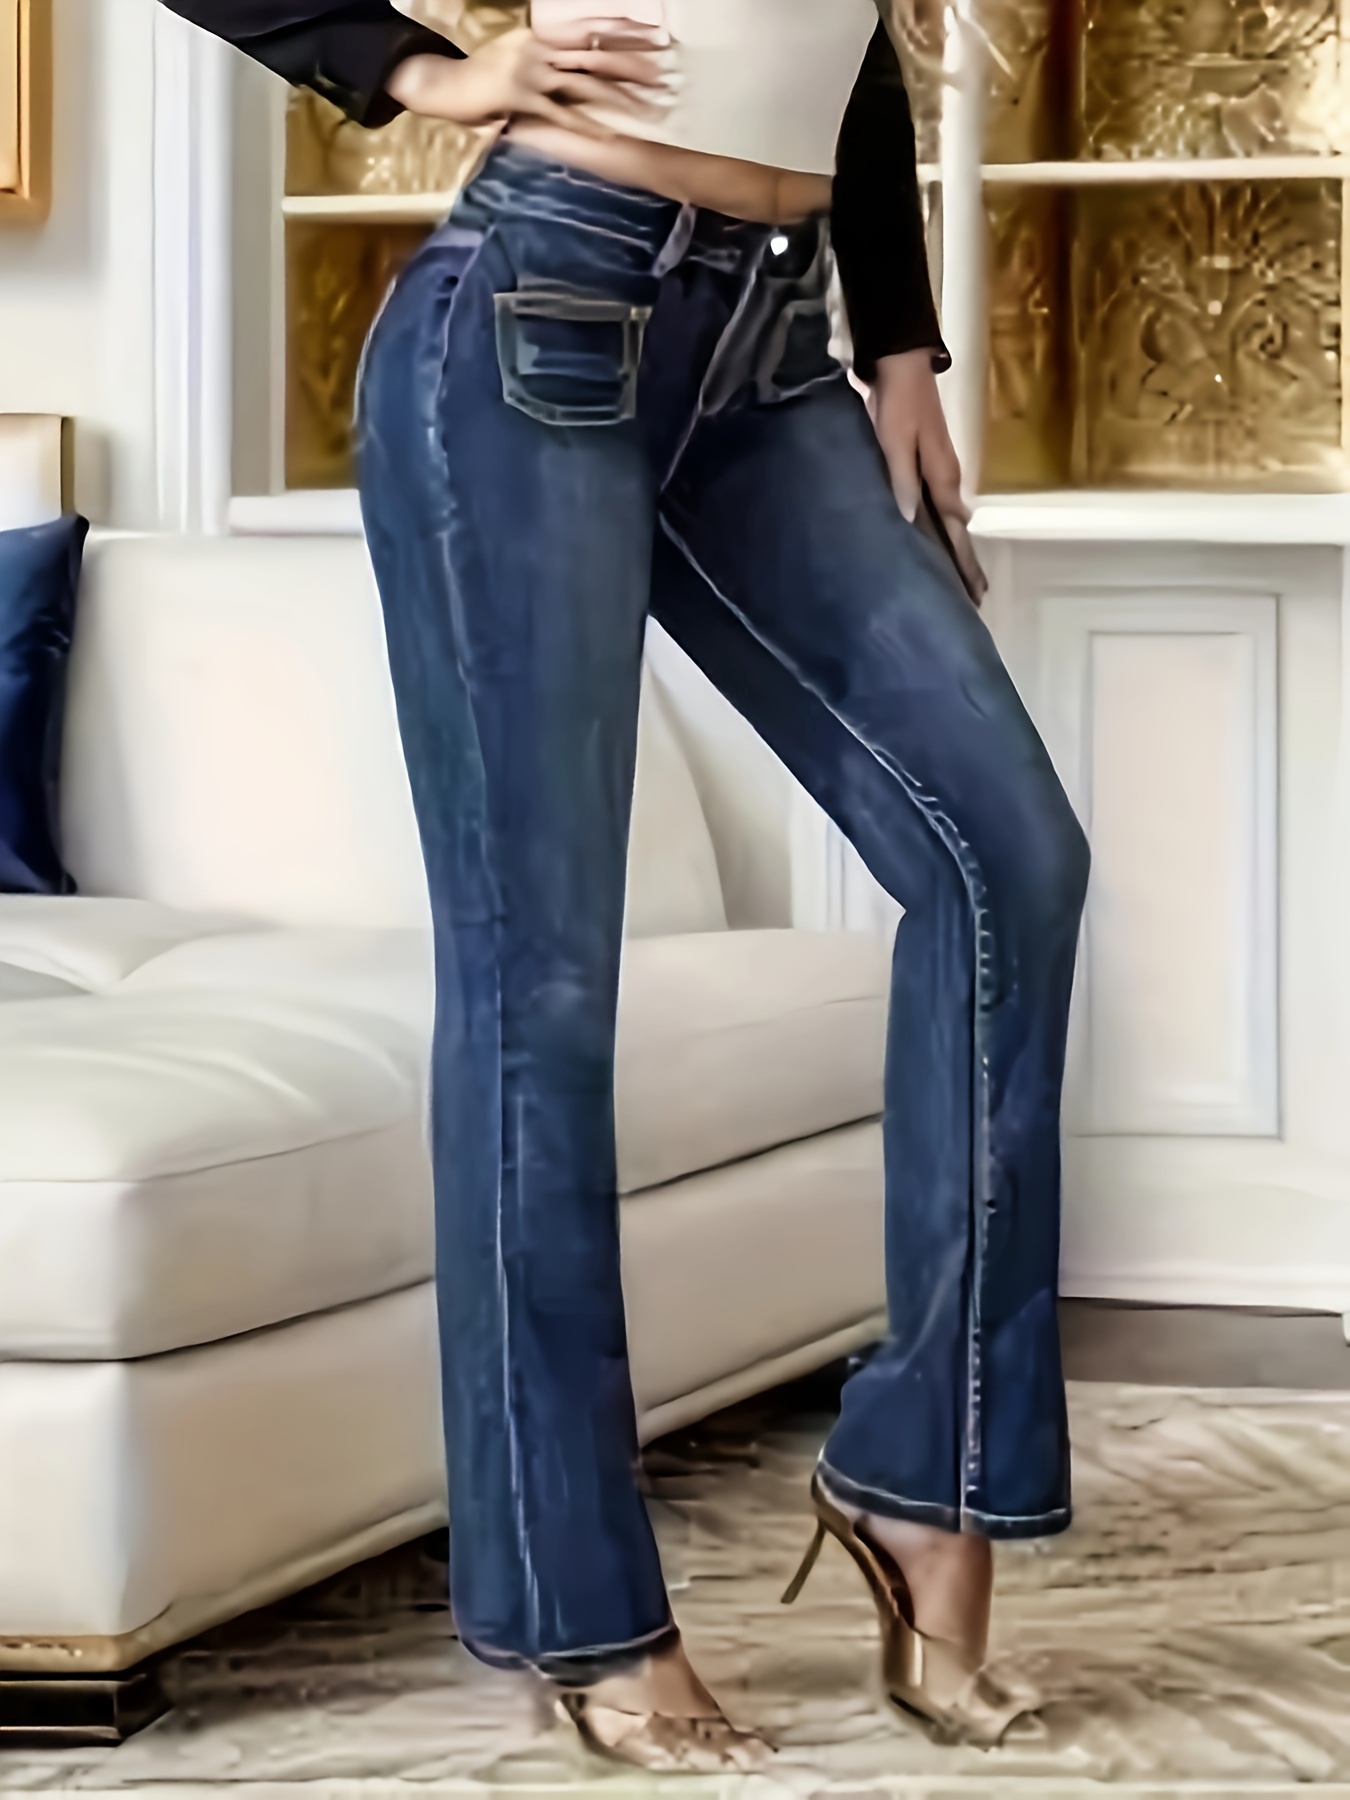 Blue Embroidered Pockets Bootcut Jeans *-Stretch Slim Fit Flap Pockets  Denim Trousers, Women's Denim Jeans & Clothing